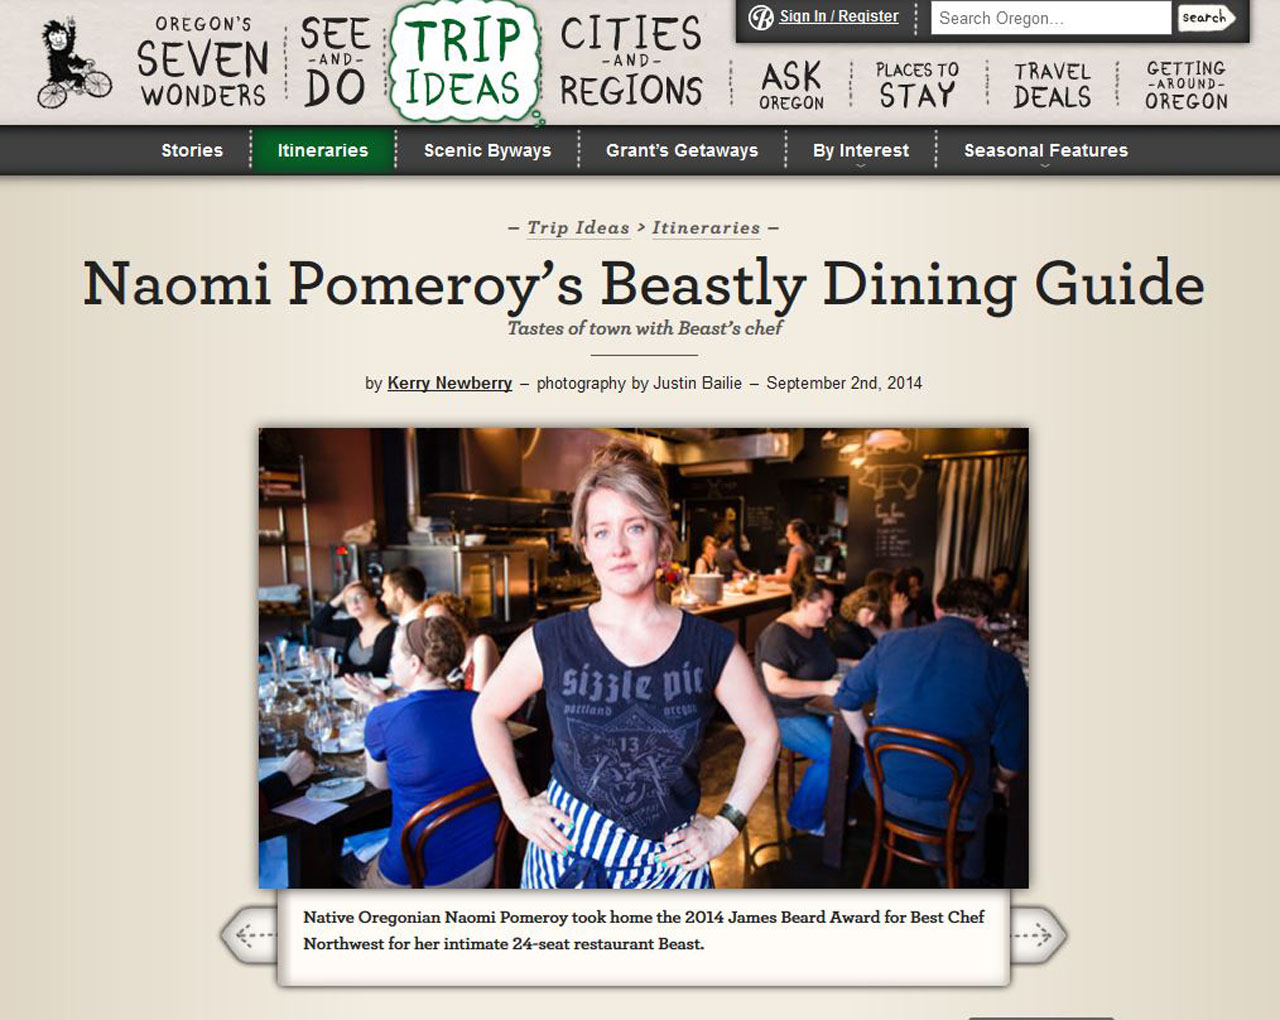 Naomi Pomeroy’s Beastly Dining Guide